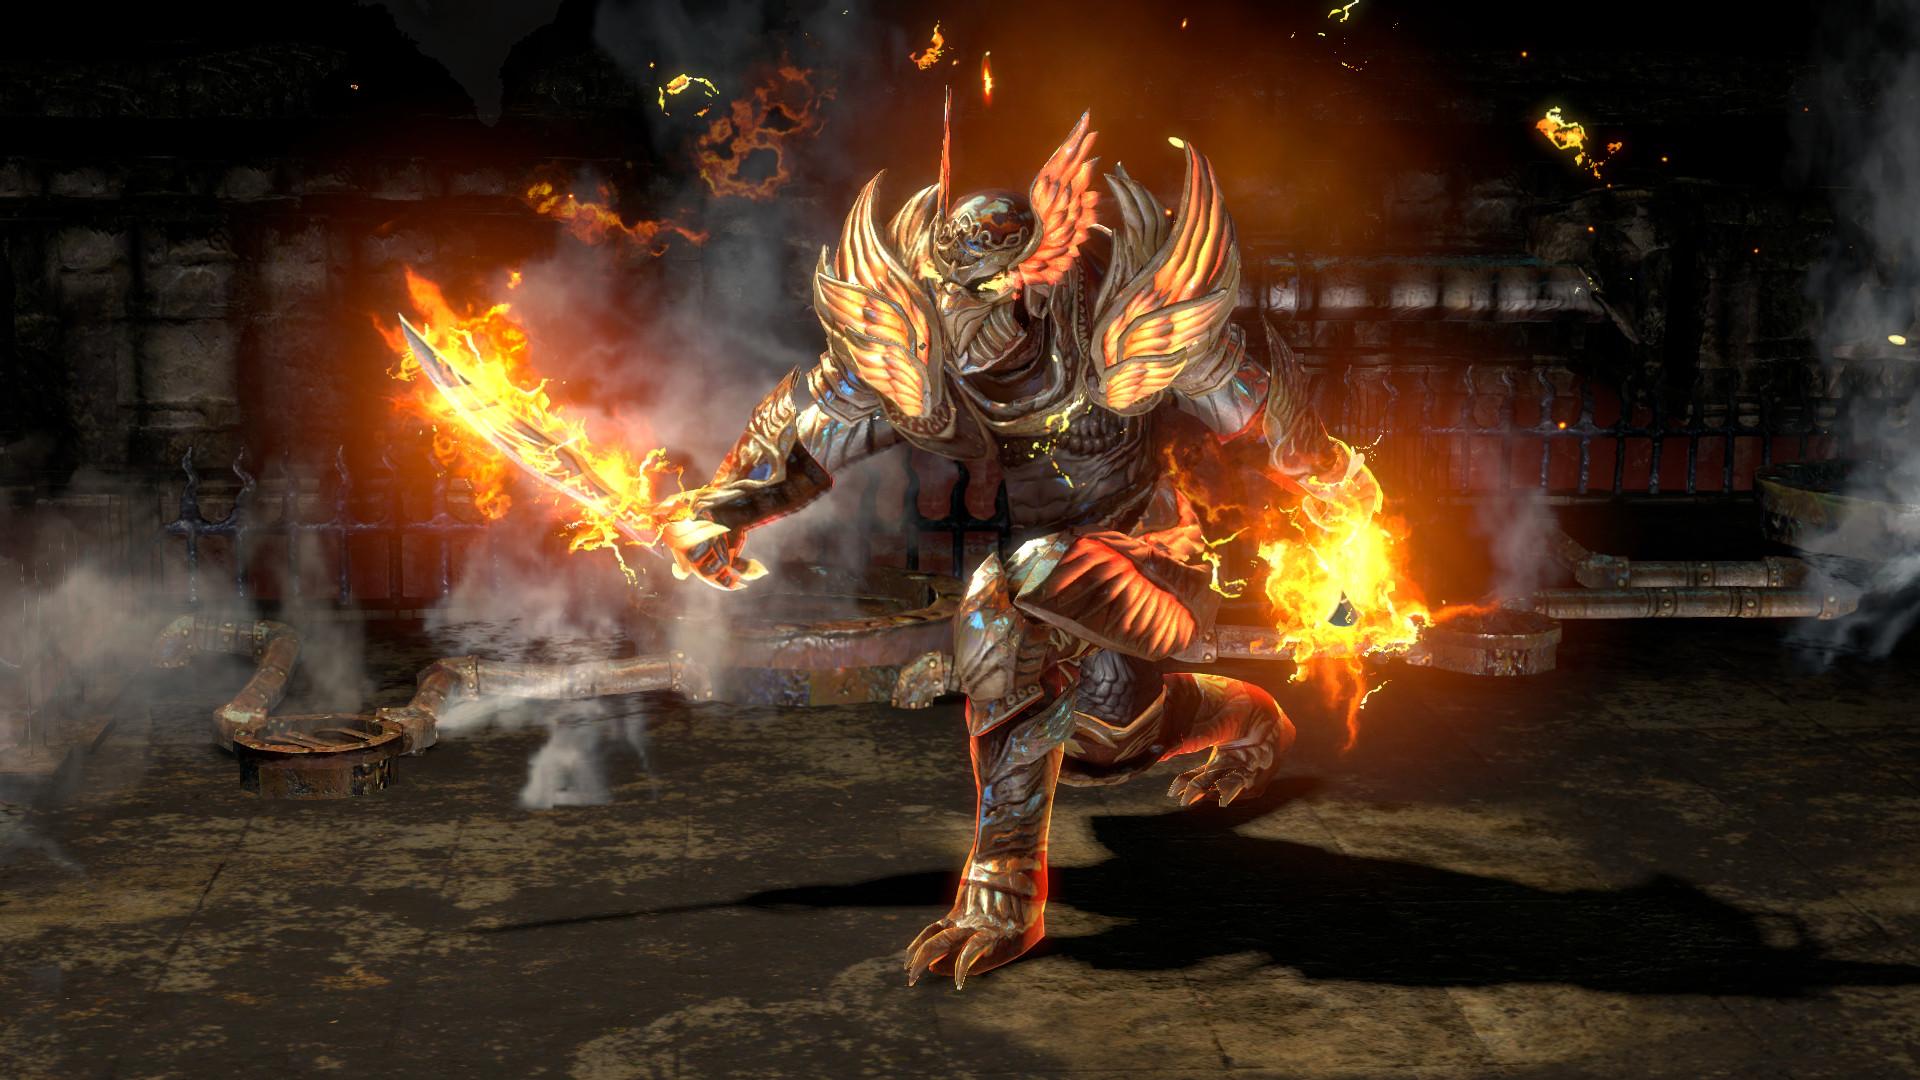 Screenshot №30 from game Path of Exile